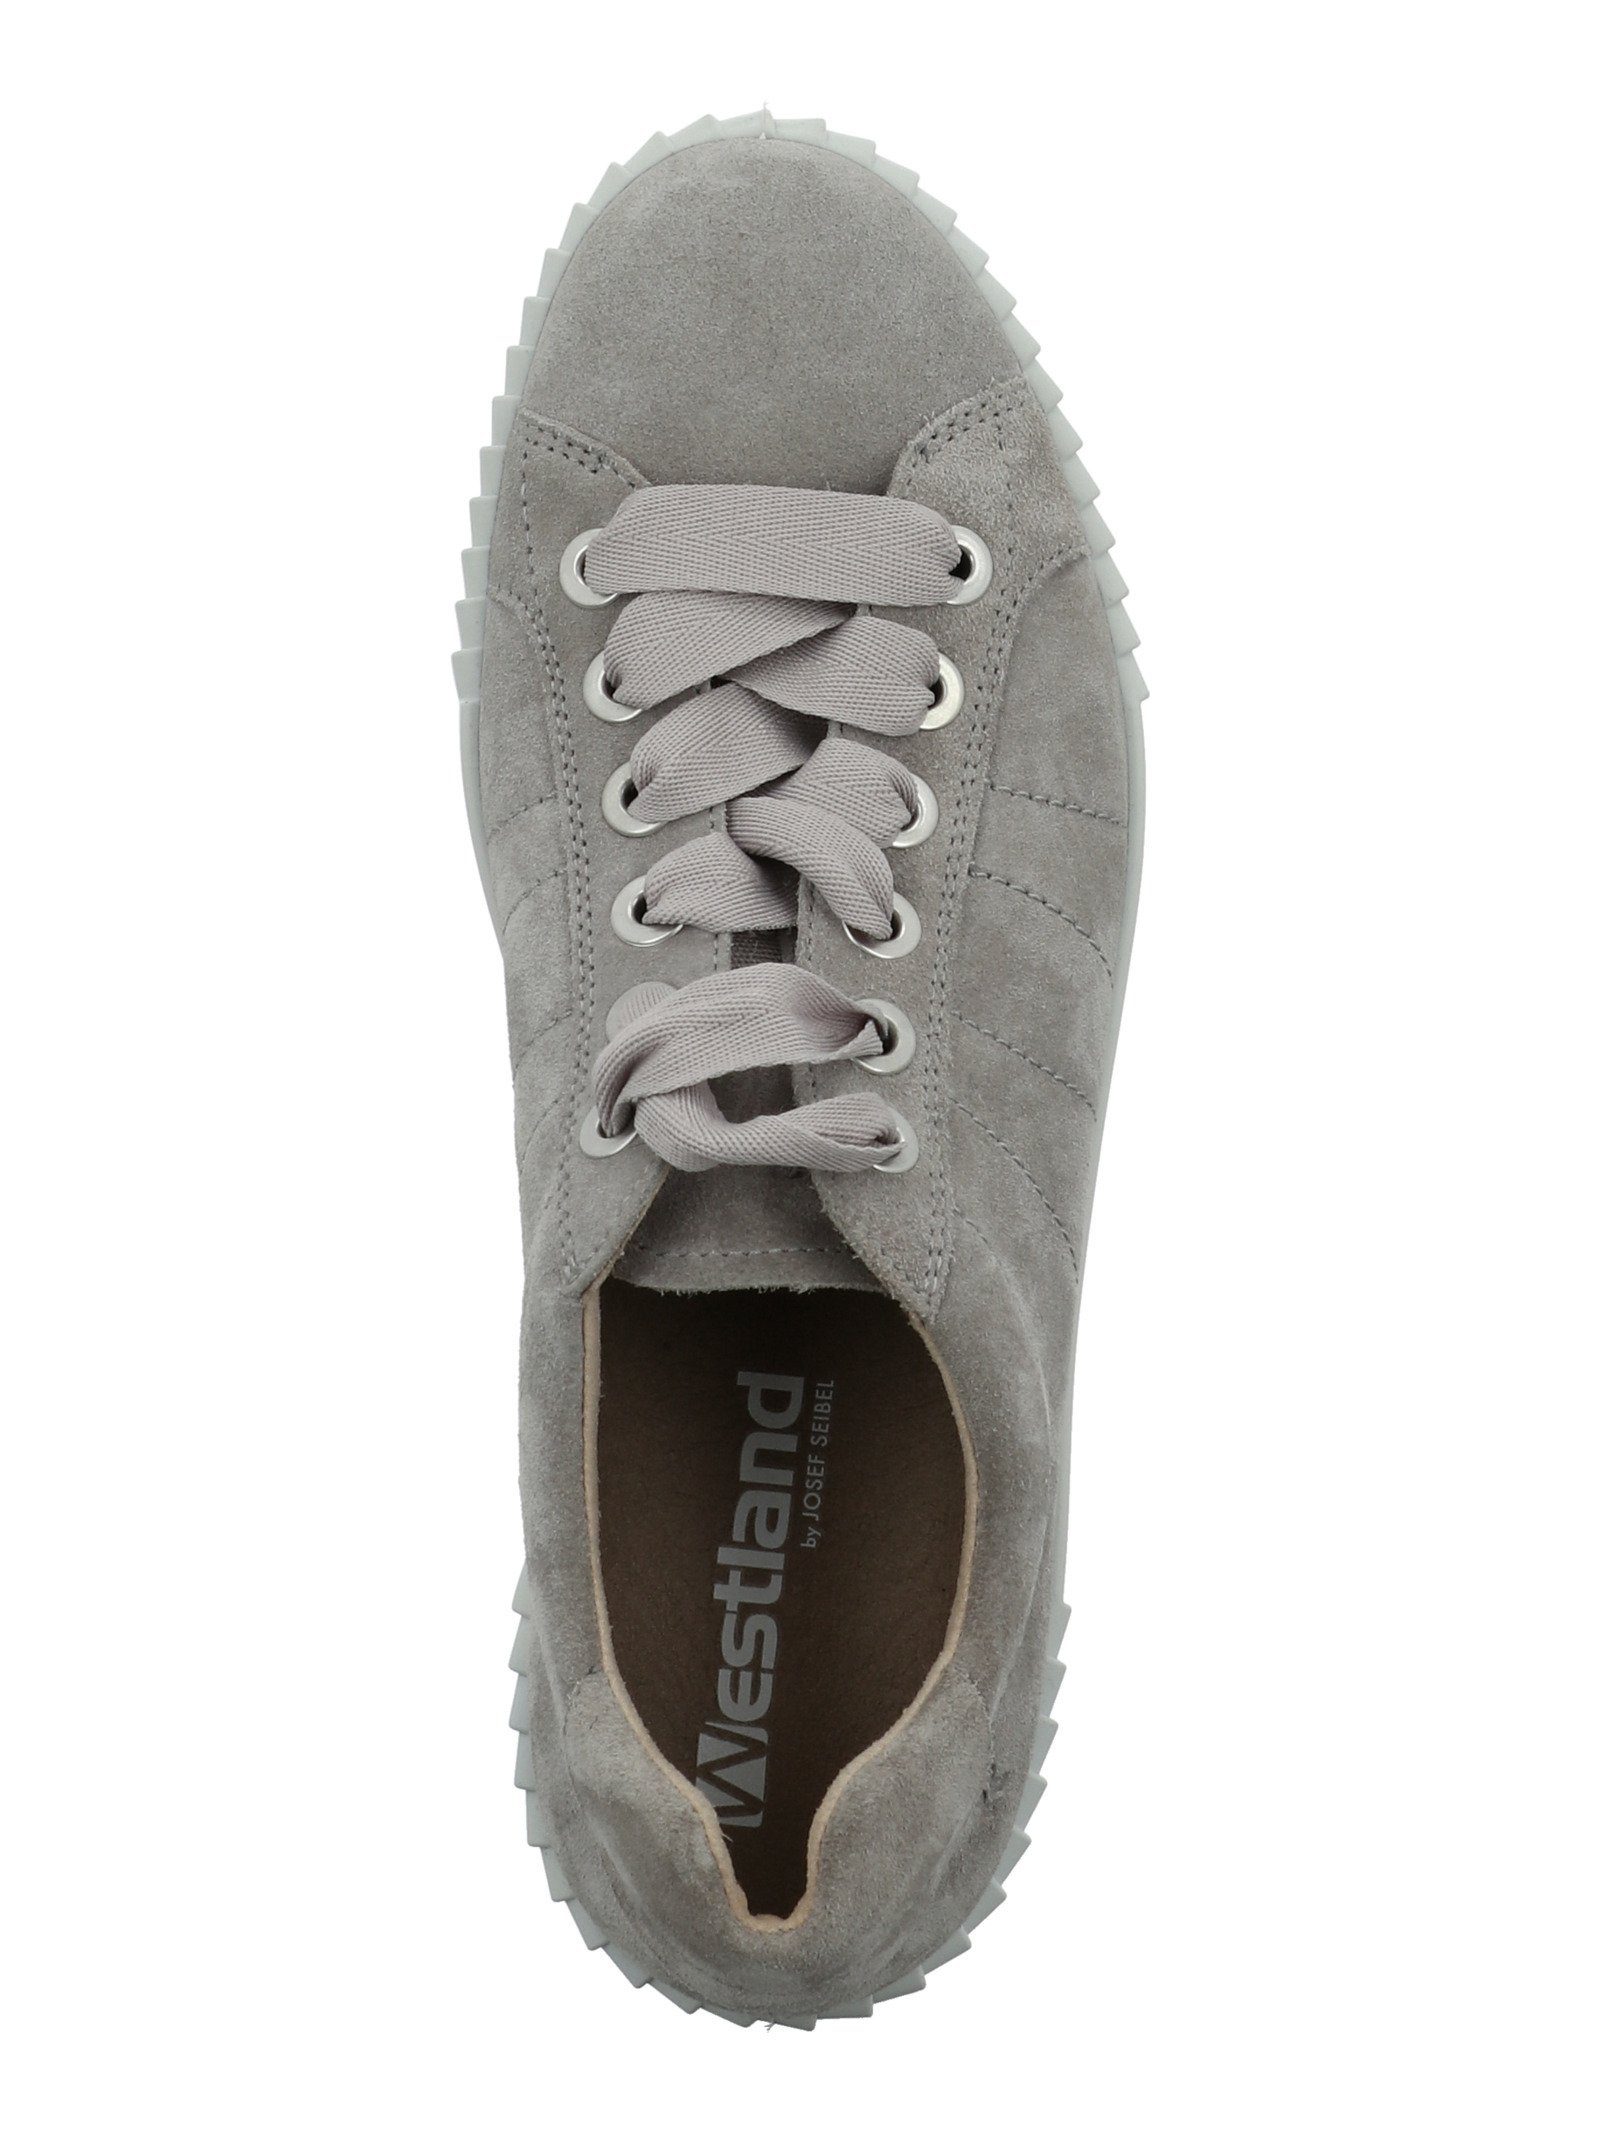 Westland Sneaker Taupe